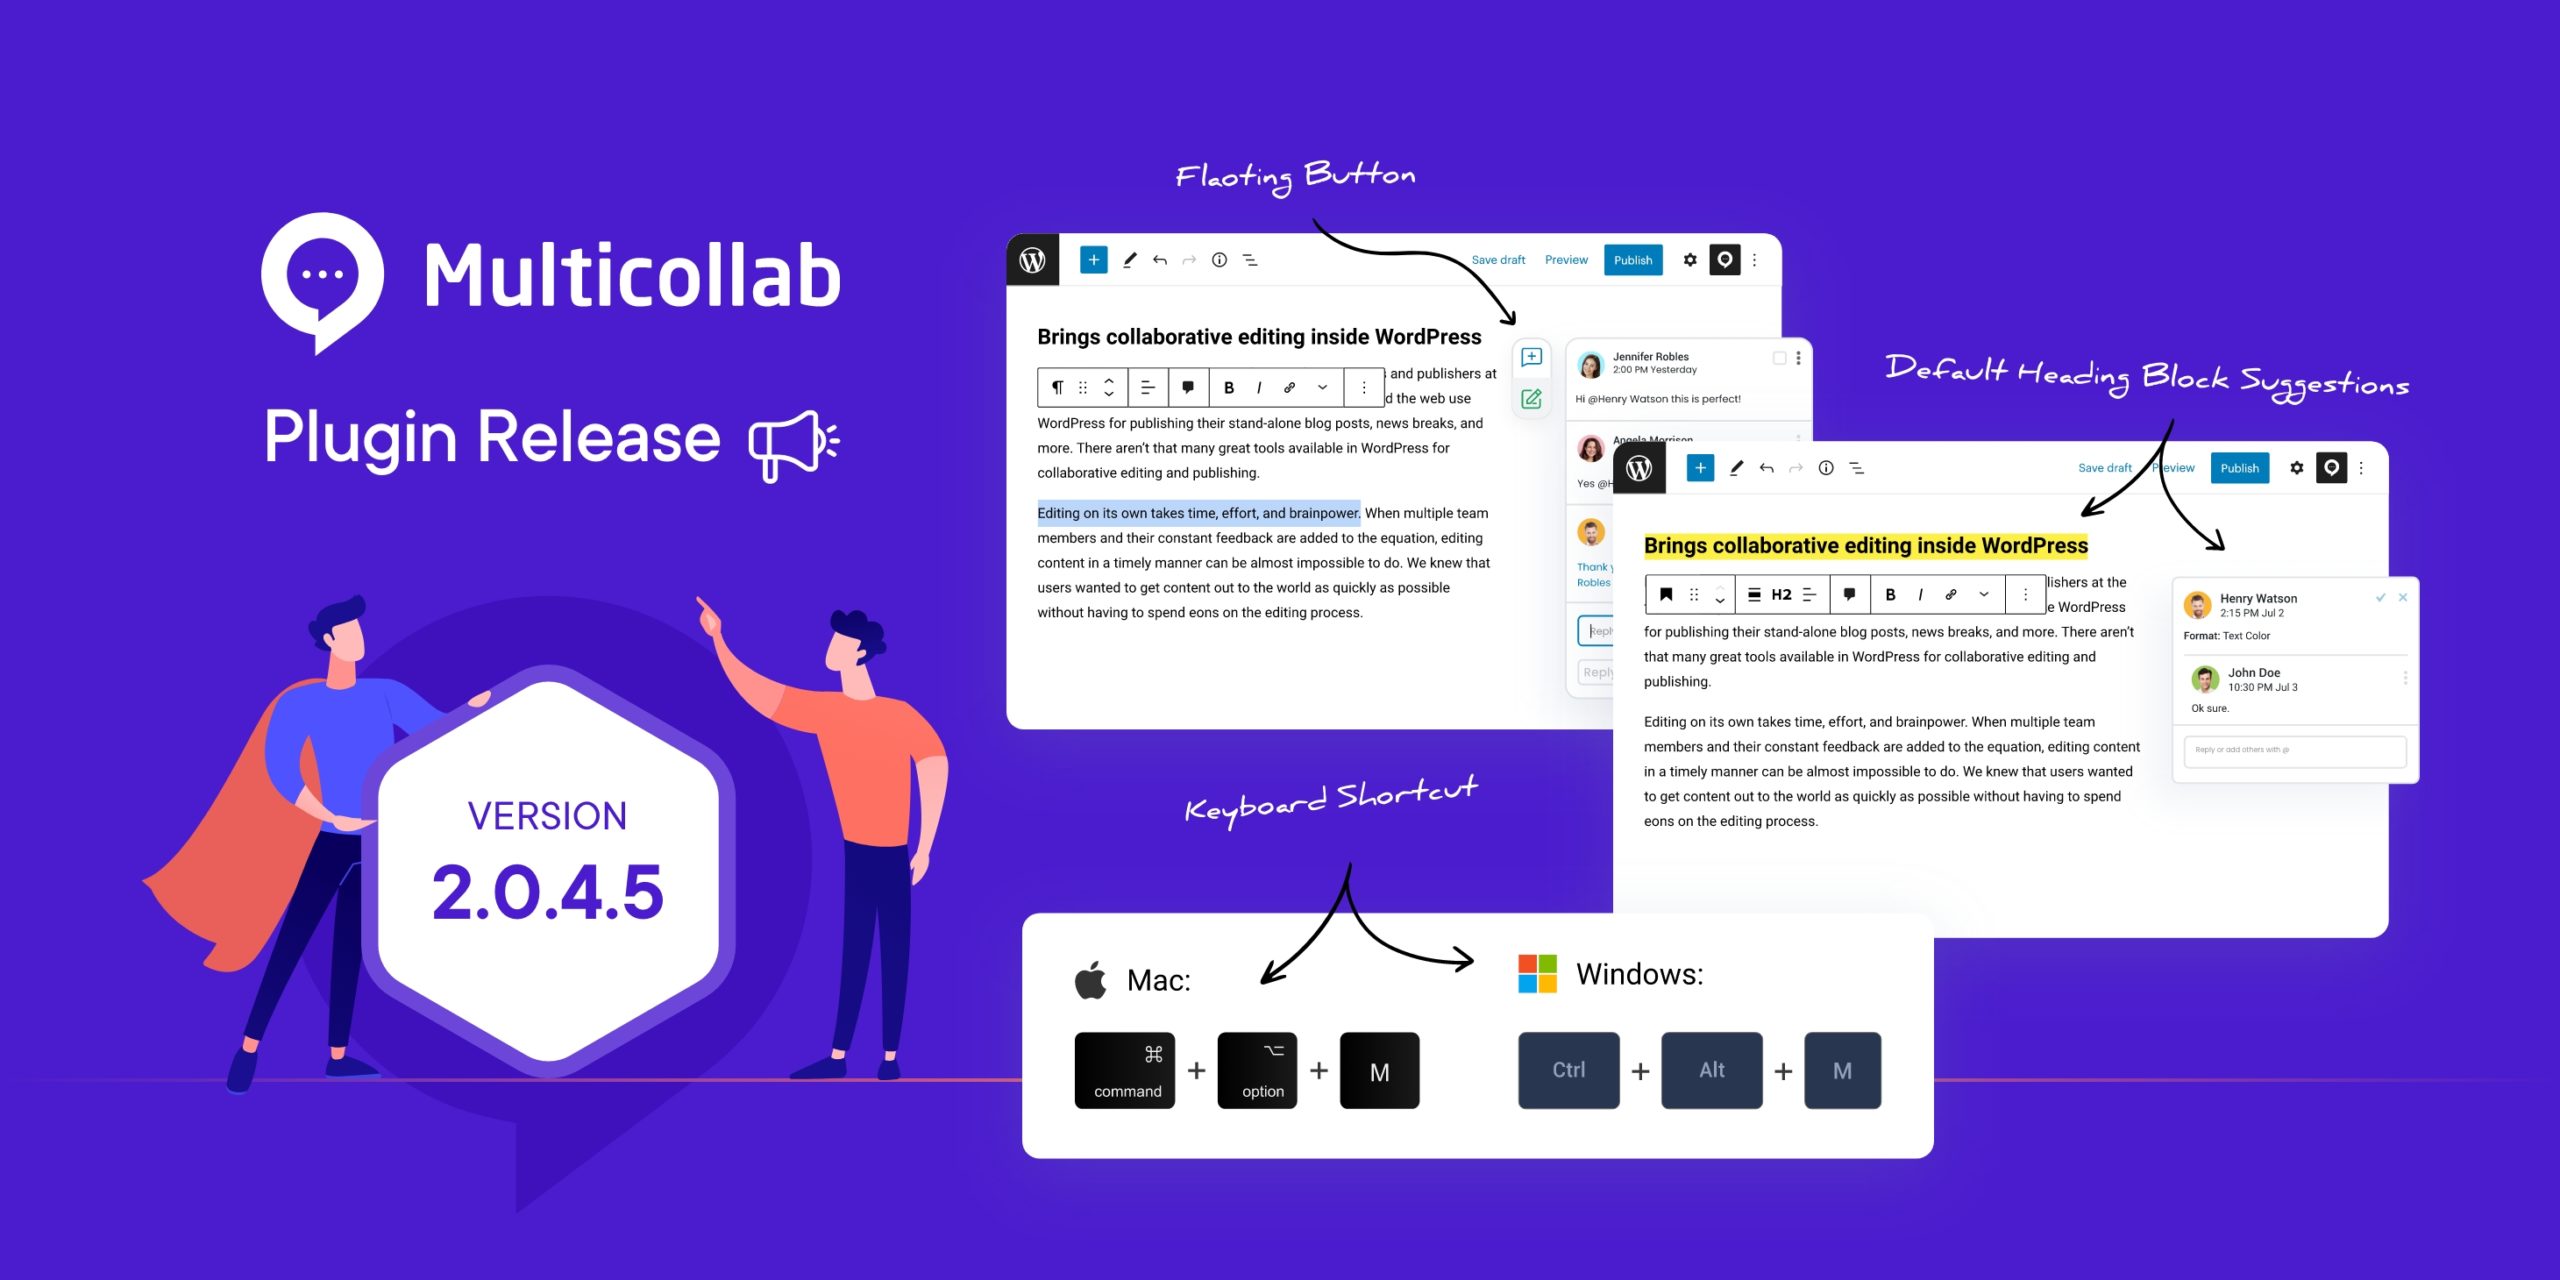 Multicollab 2.0.4.5 got even more, better, faster, and more secure.